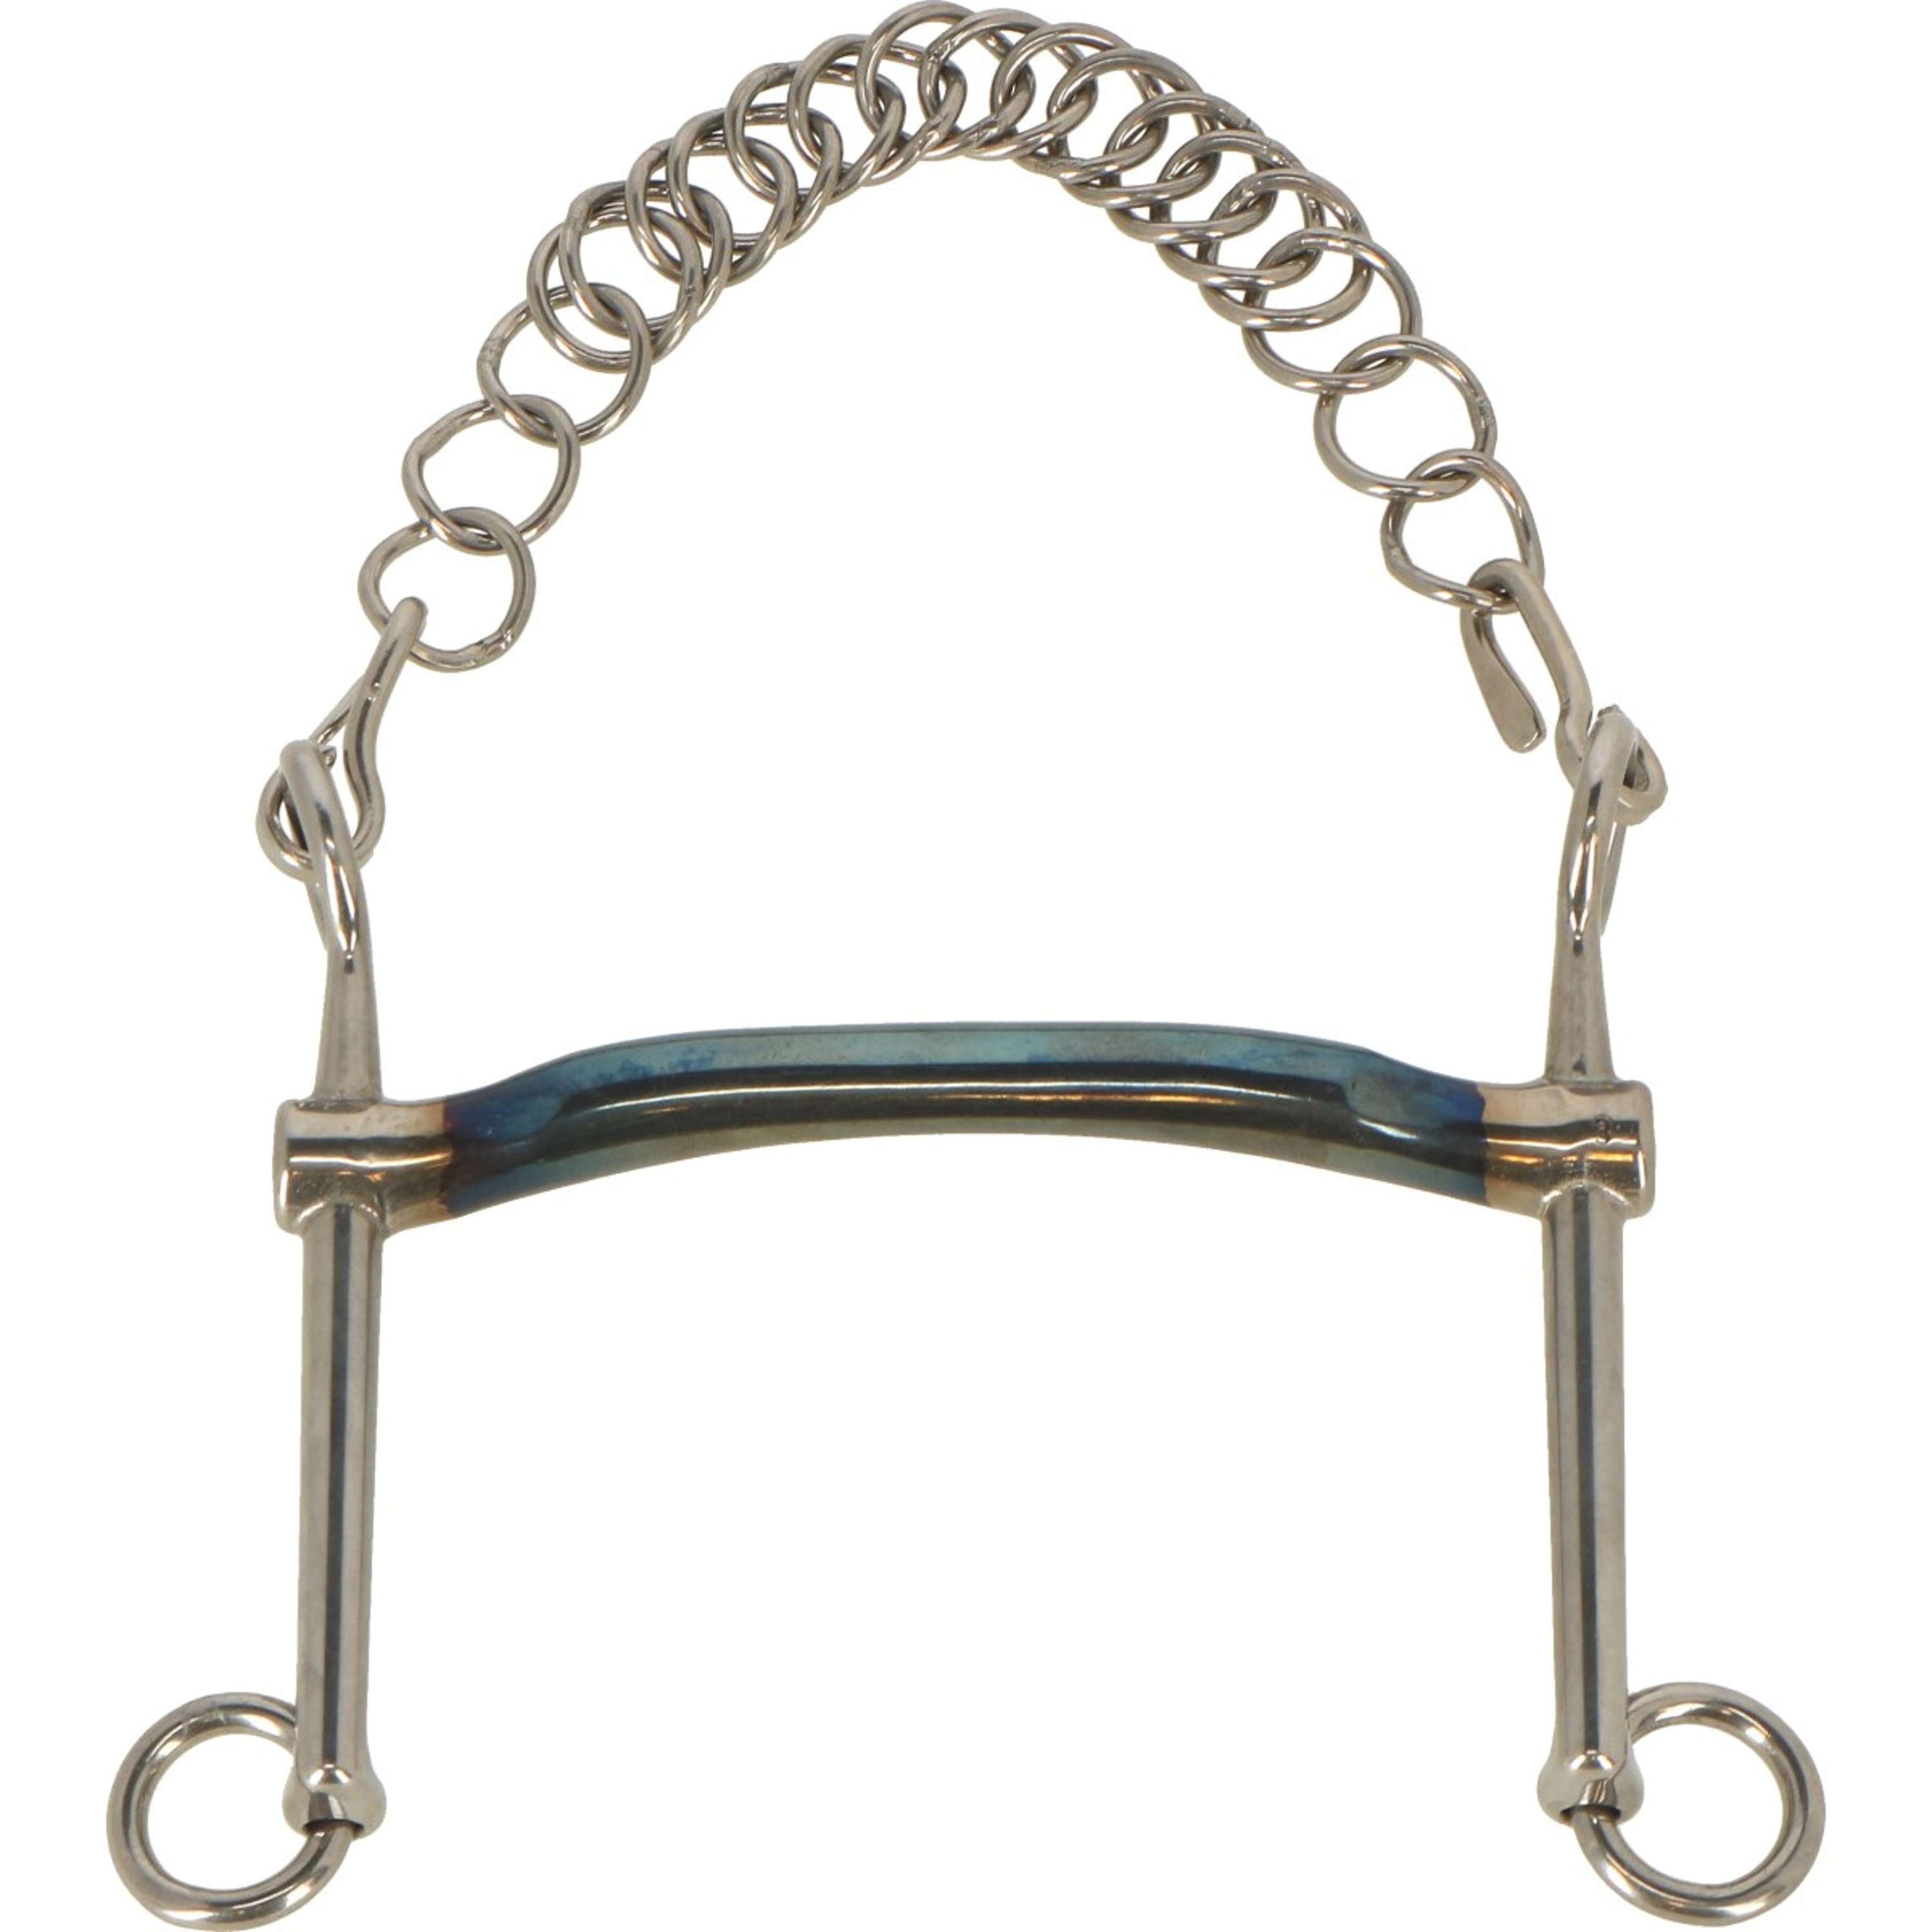 Trust Mors de Dressage Sweet Iron Weymouth Fixed arched